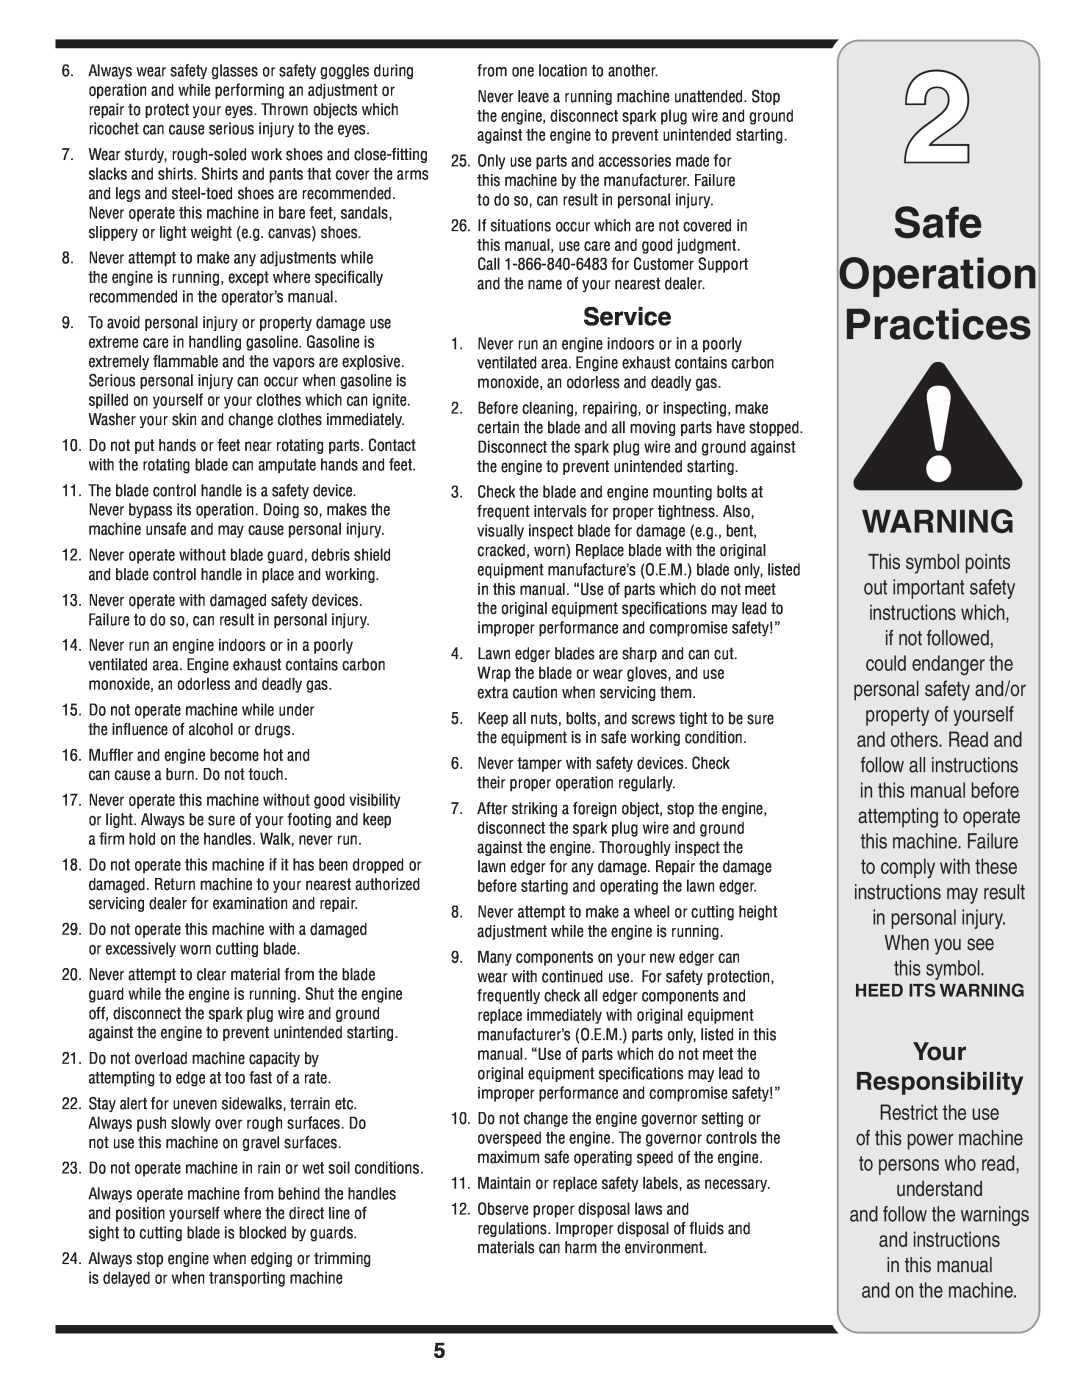 Troy-Bilt 554 manual Safe Operation Practices, Service, Your Responsibility, Heed Its Warning, from one location to another 